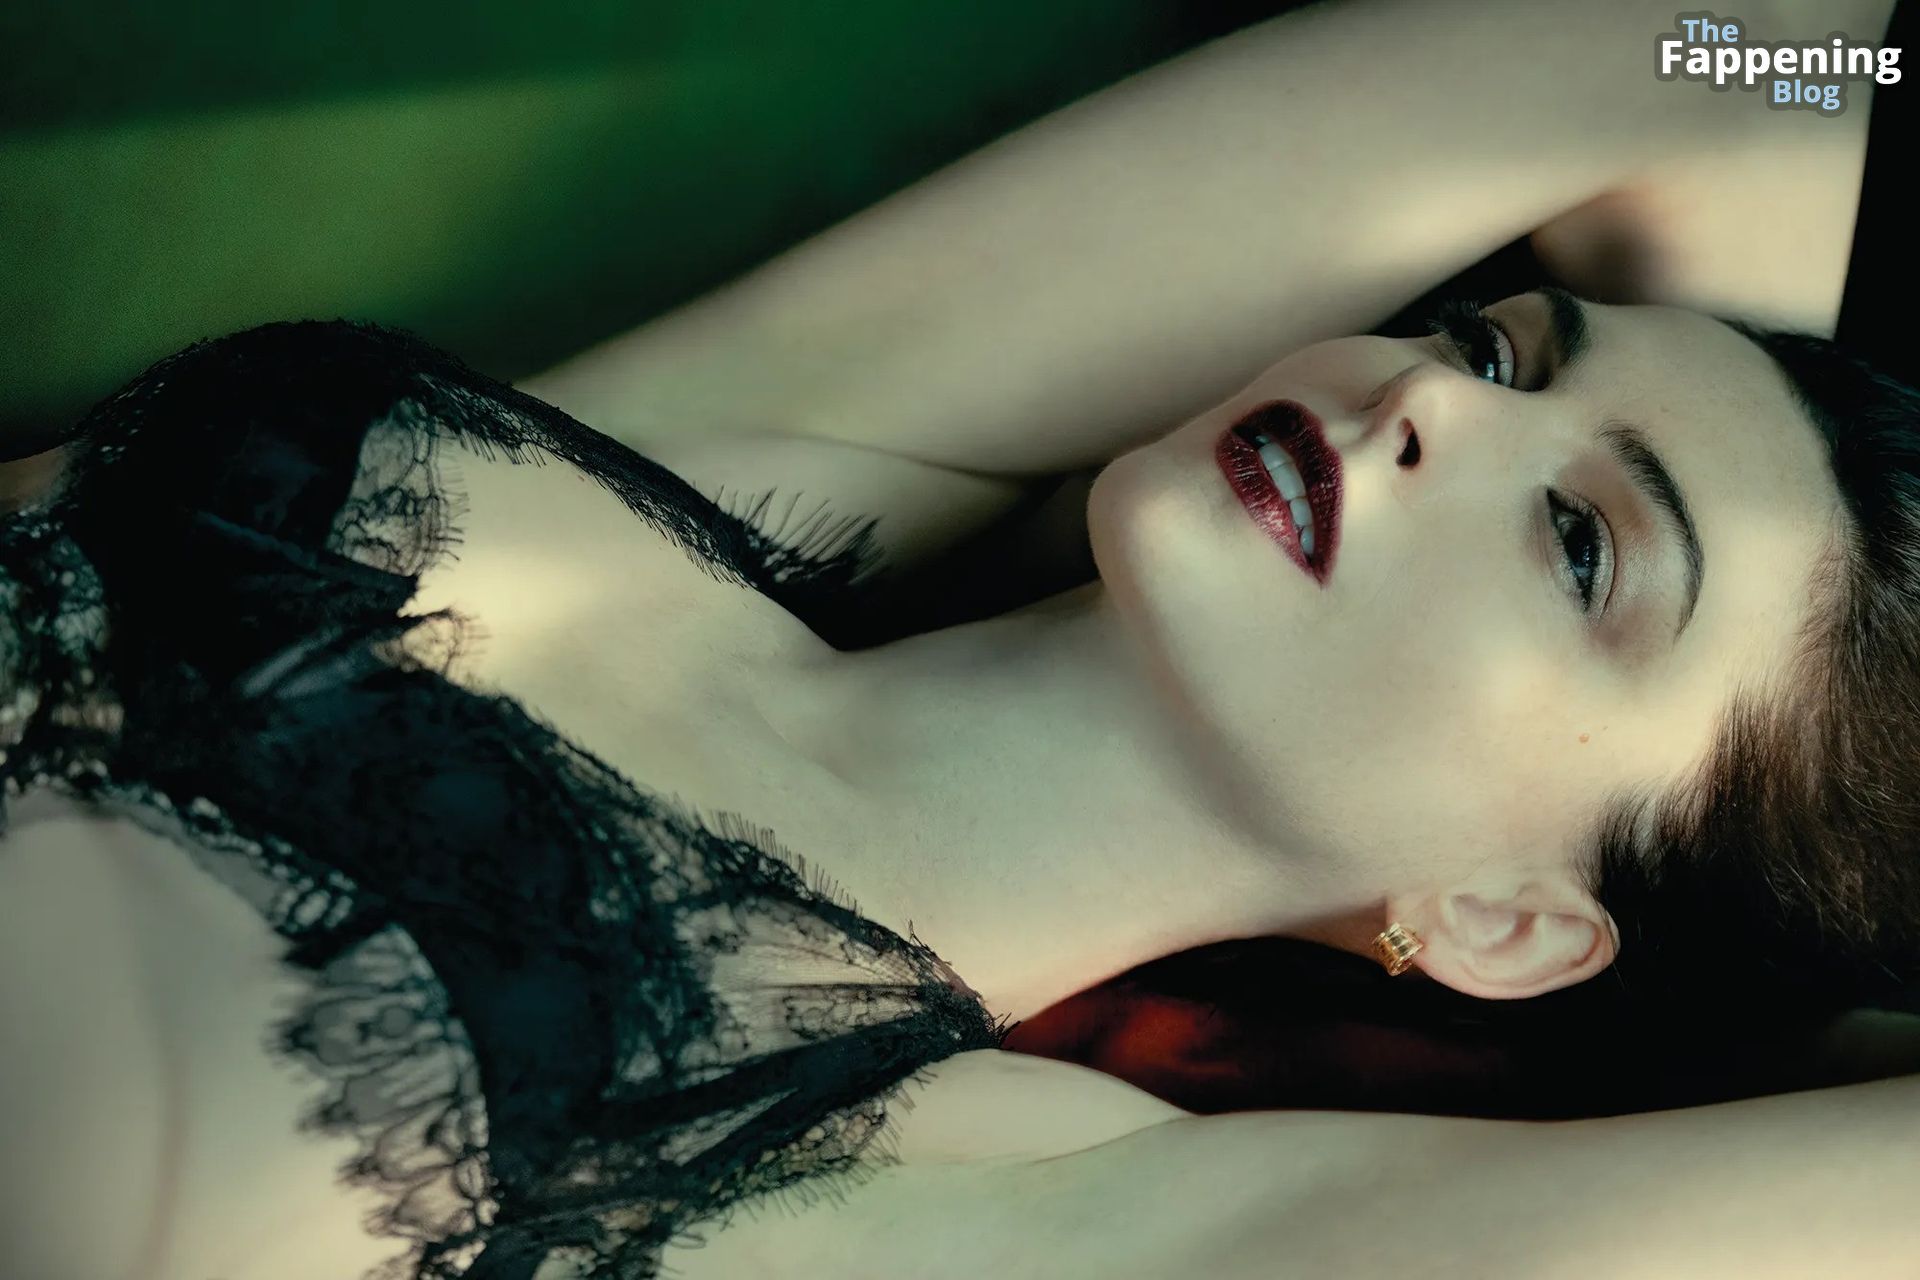 Anne-Hathaway-Sexy-6-The-Fappening-Blog.jpg